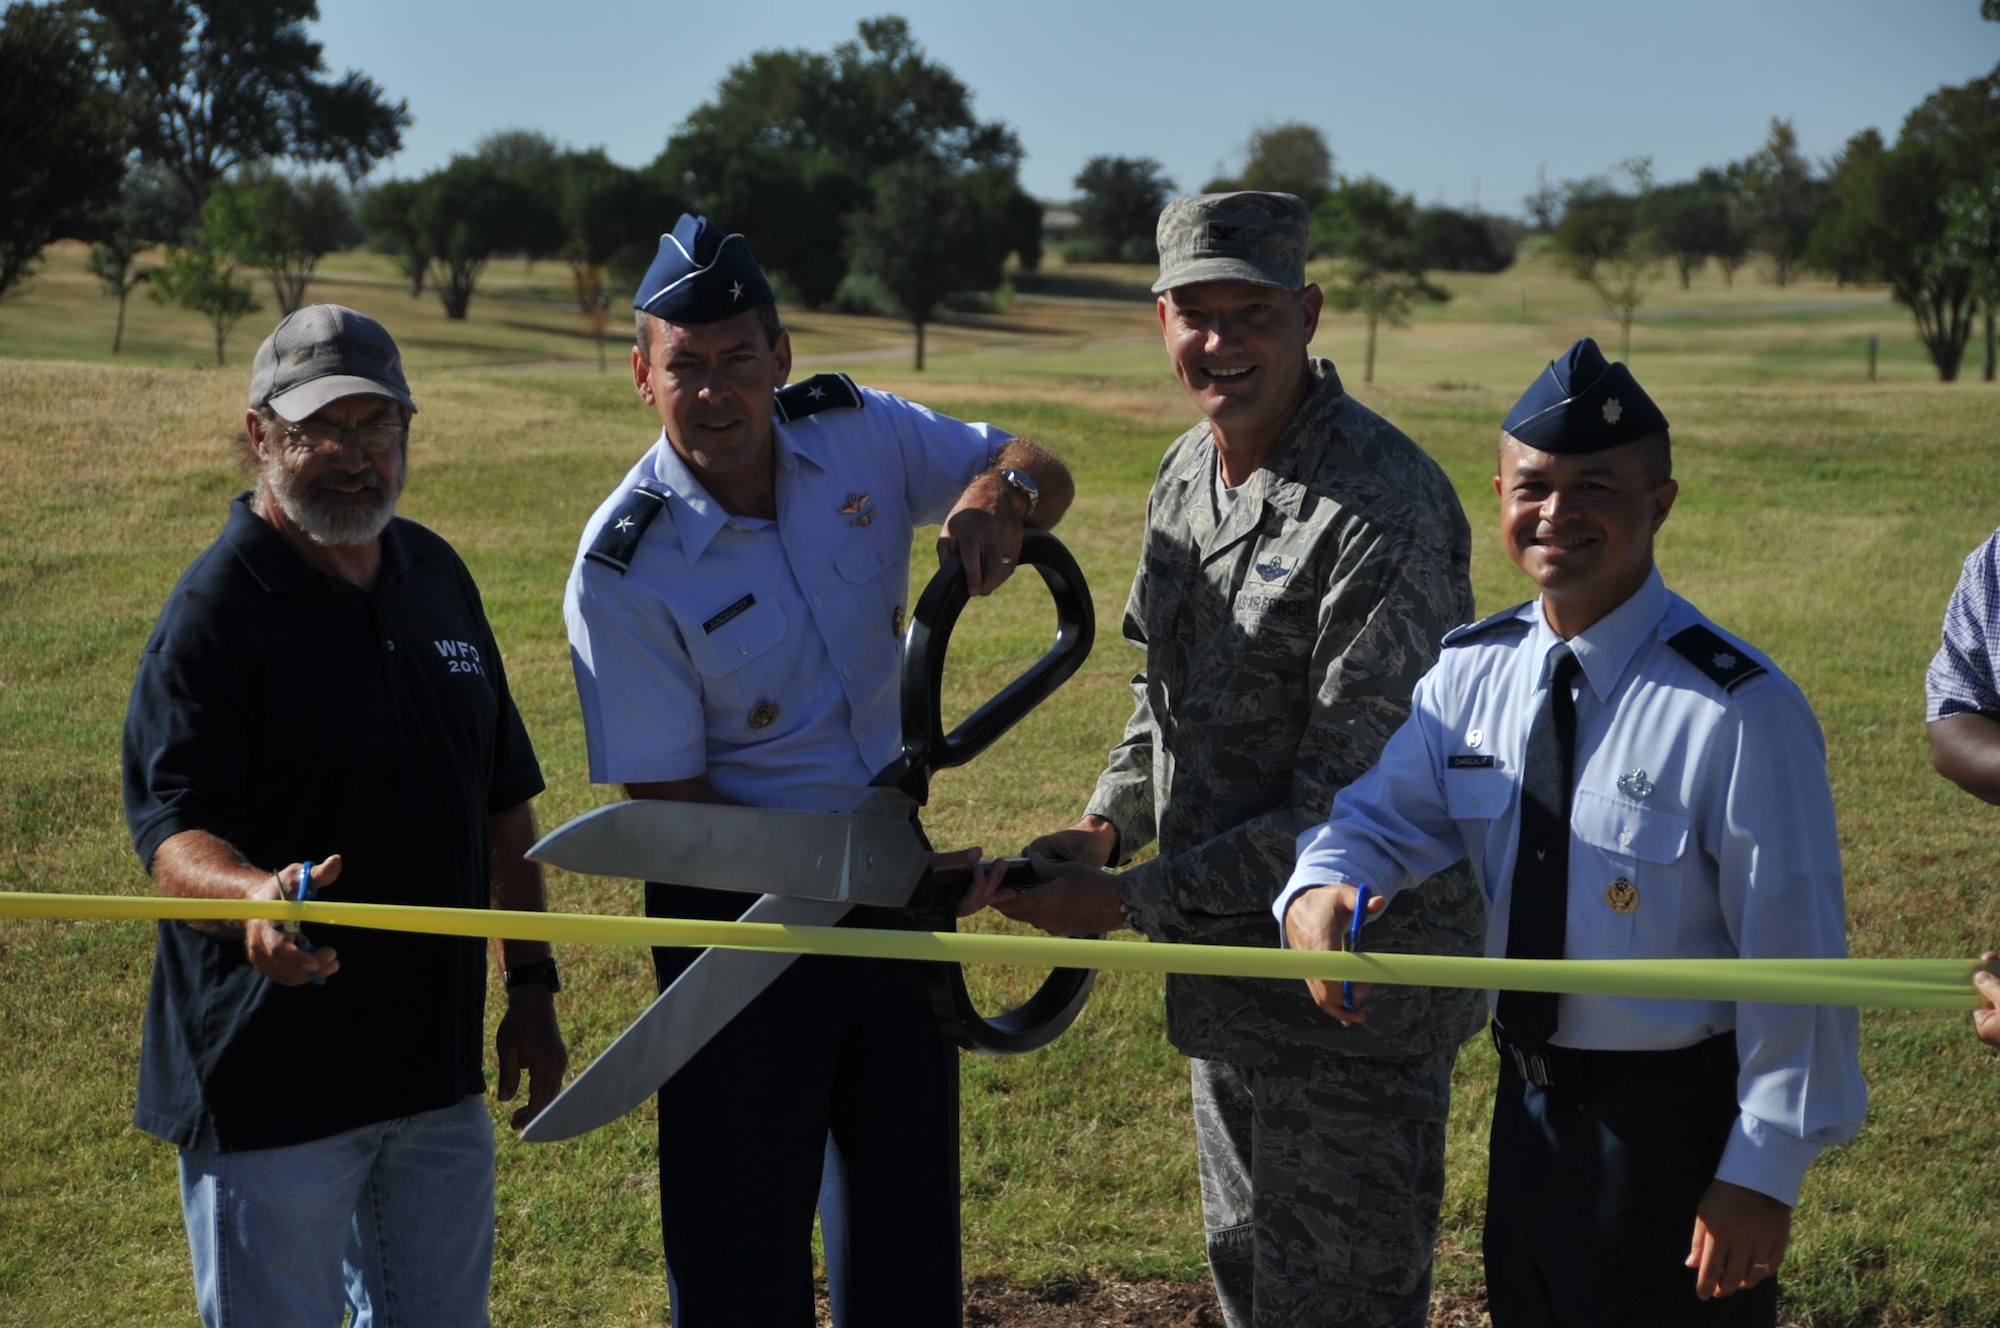 Jack Banks, president of the Wichita Falls Disc Golf Association, Brig. Gen. Scott Kindsvater, 82nd Training Wing commander, Col. Lance Bunch, 80th Flying Training Wing commander and Lt. Col. Joseph Chargualaf, 82nd Force Support Squadron commander, ceremonially opened the newly transformed Wind Creek Park Aug. 25, 2014, during an official ribbon cutting ceremony introducing the disc golf course to Sheppard Air Force Base, Texas. The base partnered with the Wichita Falls Disc Golf Association to complete the project. (U.S. Air Force photo/Airman 1st Class Robert L. McIlrath)